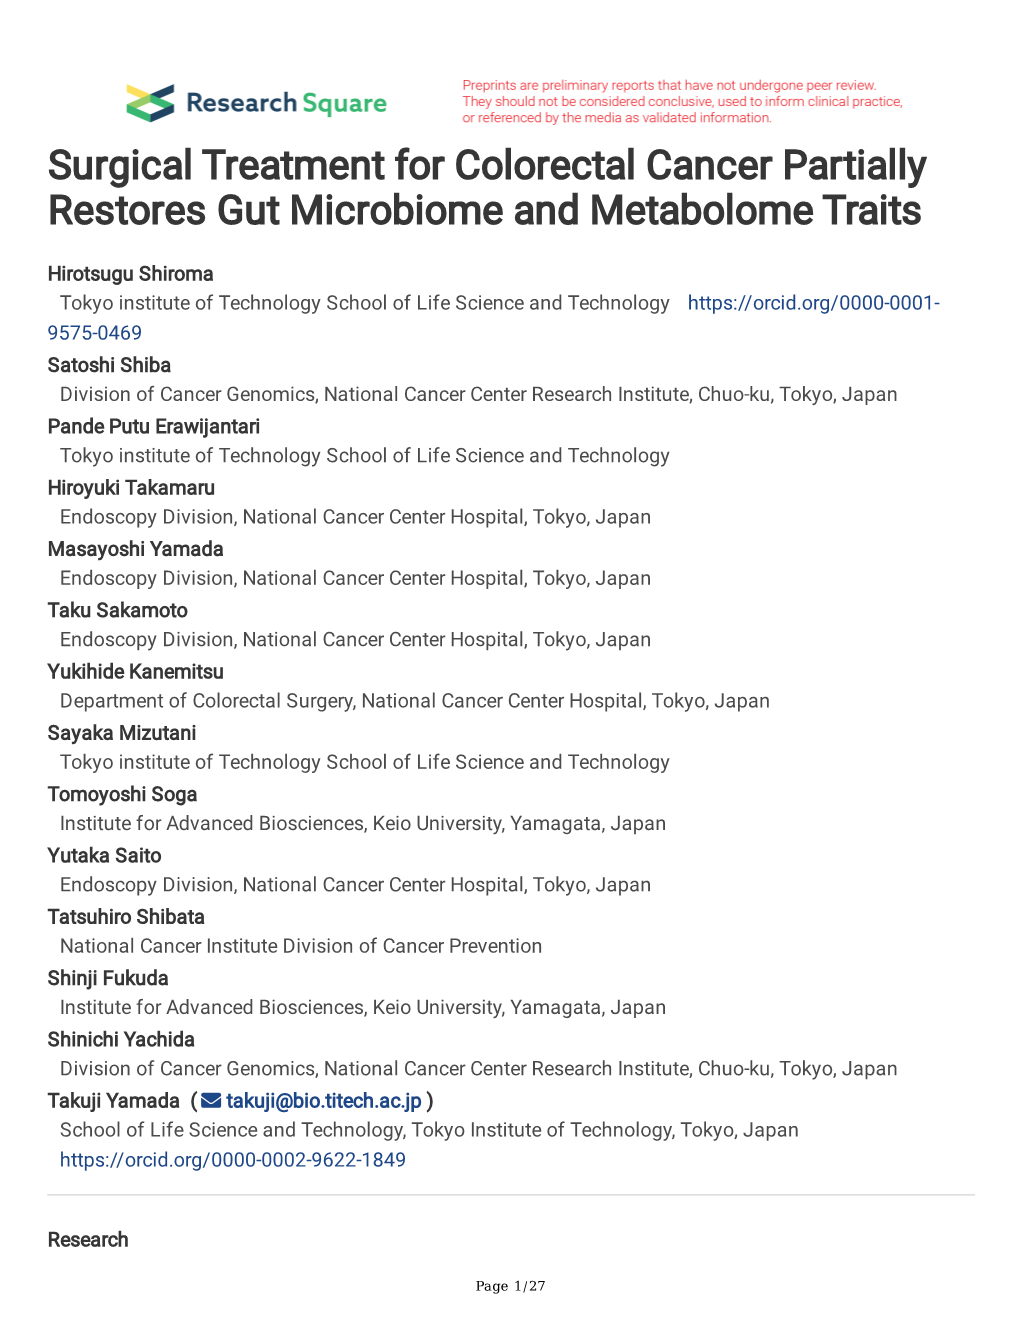 Surgical Treatment for Colorectal Cancer Partially Restores Gut Microbiome and Metabolome Traits